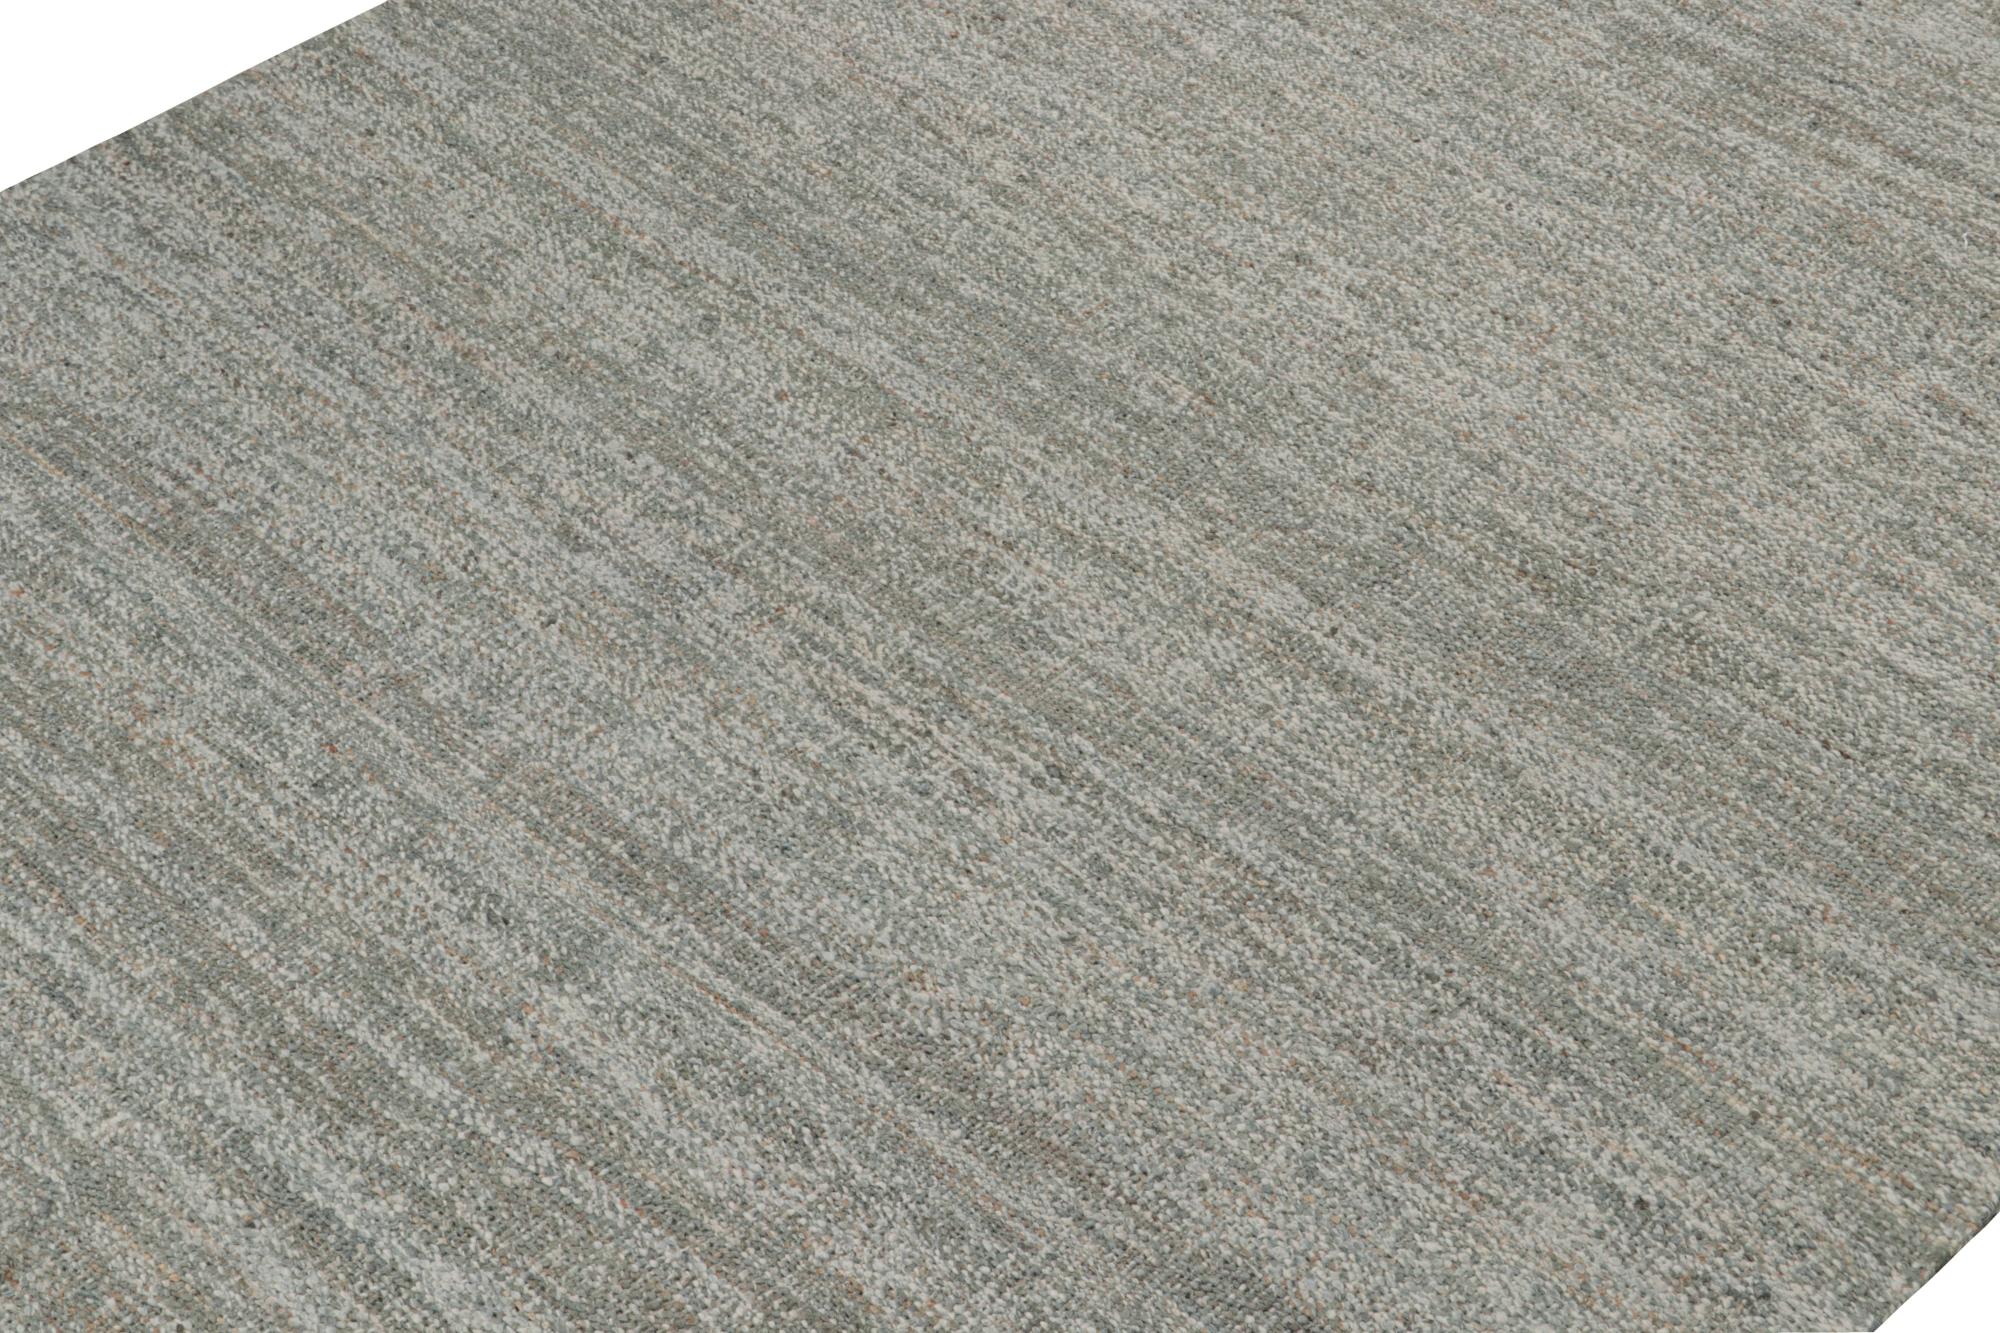 This contemporary 9x12 flatweave belongs to Rug & Kilim’s brand new collection—handwoven in all-natural jute.

On the Design: 

This oversized Kilim enjoys a tasteful boucle-like texture and sense of movement for a smart take on plain rugs. A